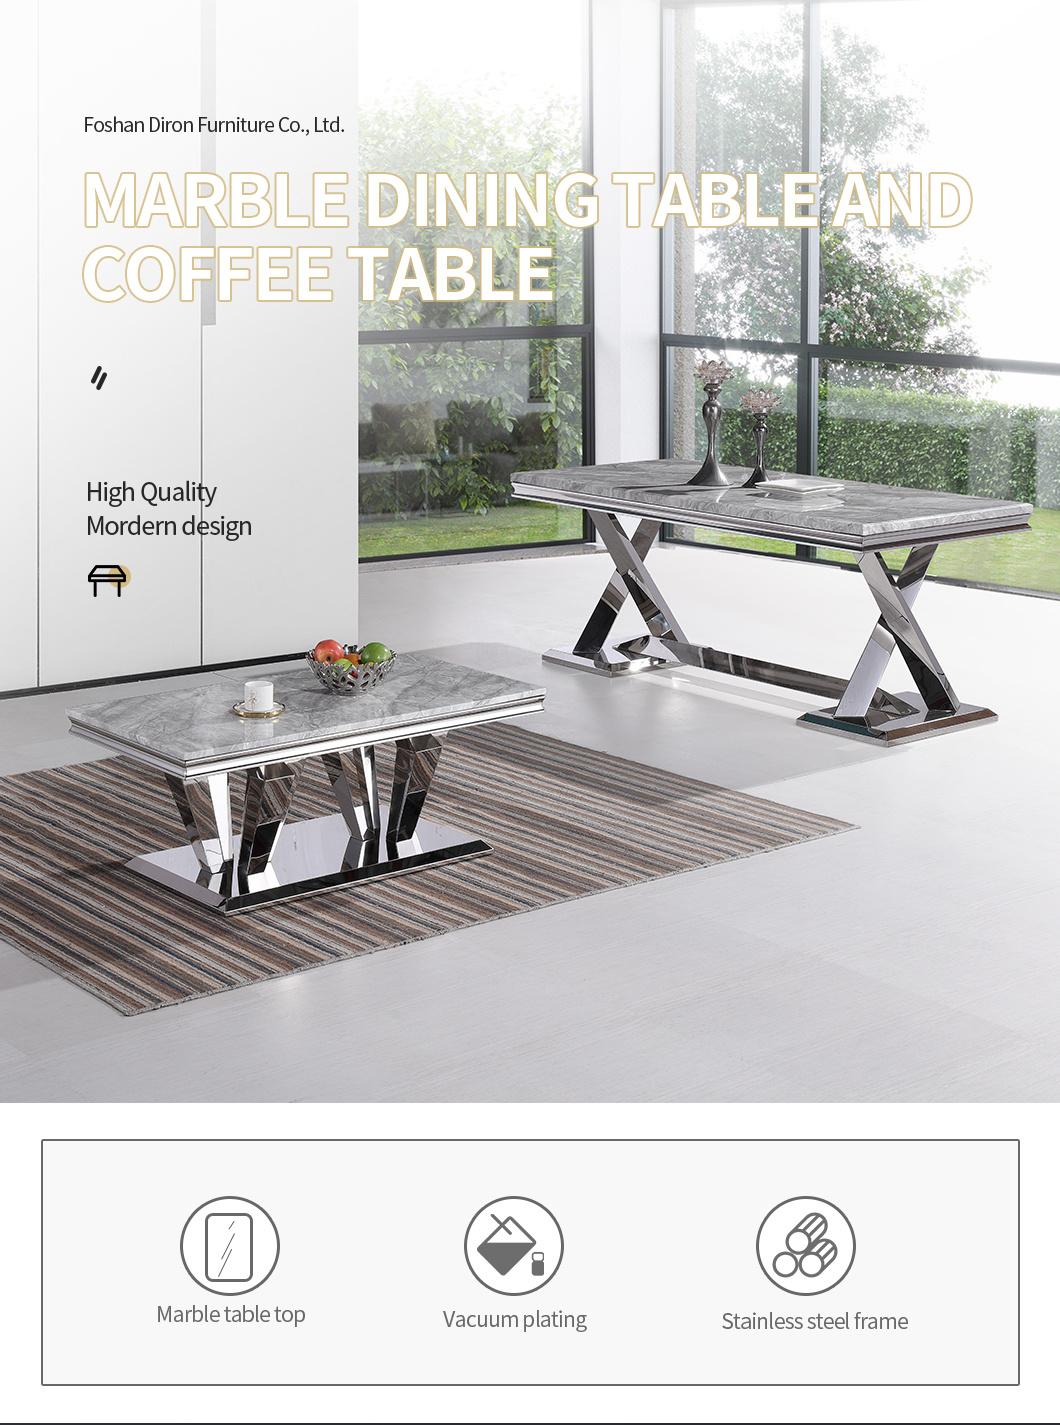 China Home Furniture Factory New Fashion Design Diningroom Livingroom Stainless Steel Marble Coffee Table